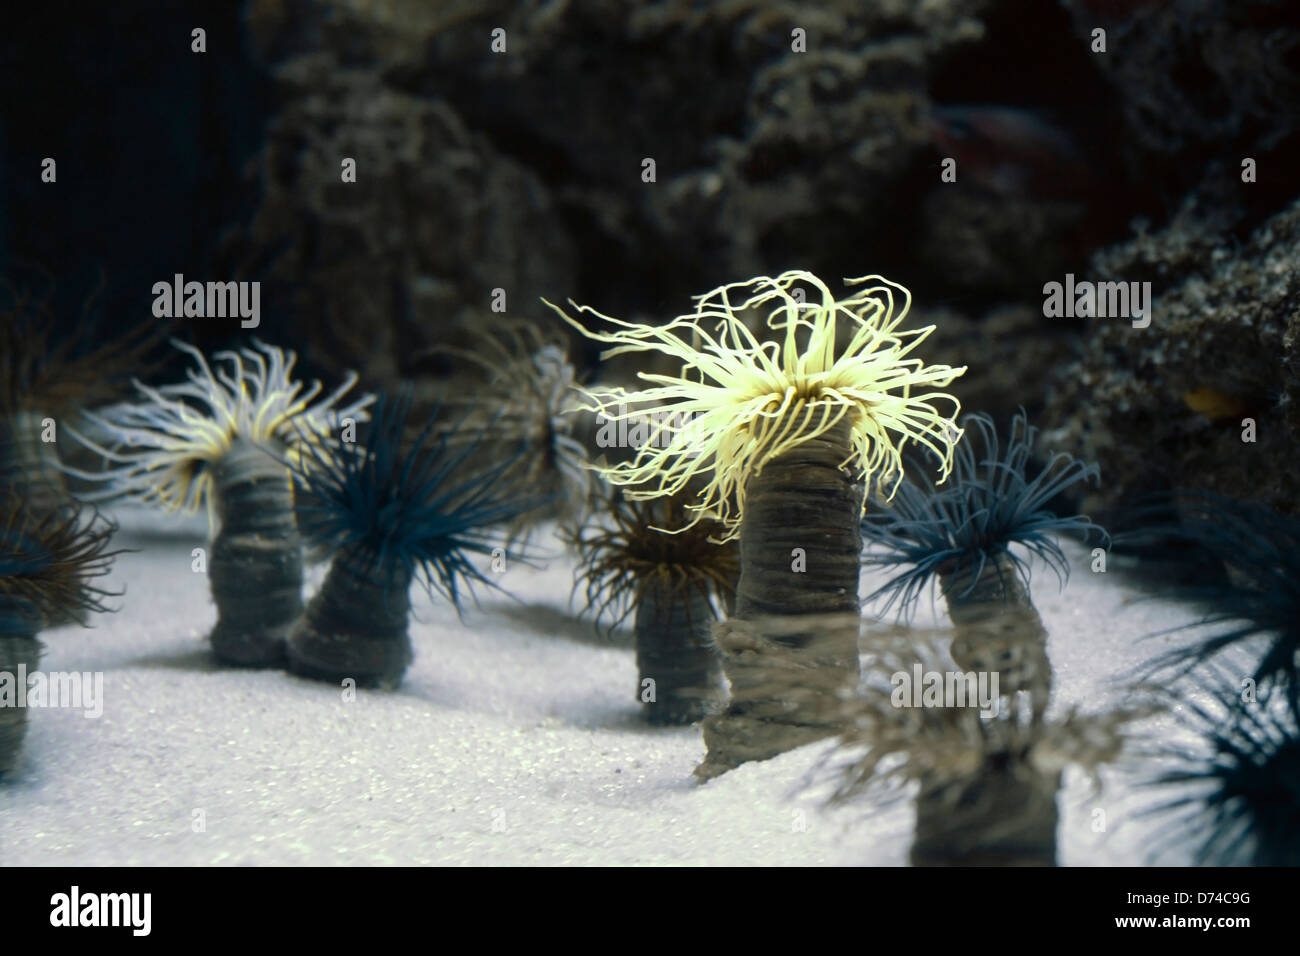 underwater scenery with some of sea anemones located on sandy ground Stock Photo